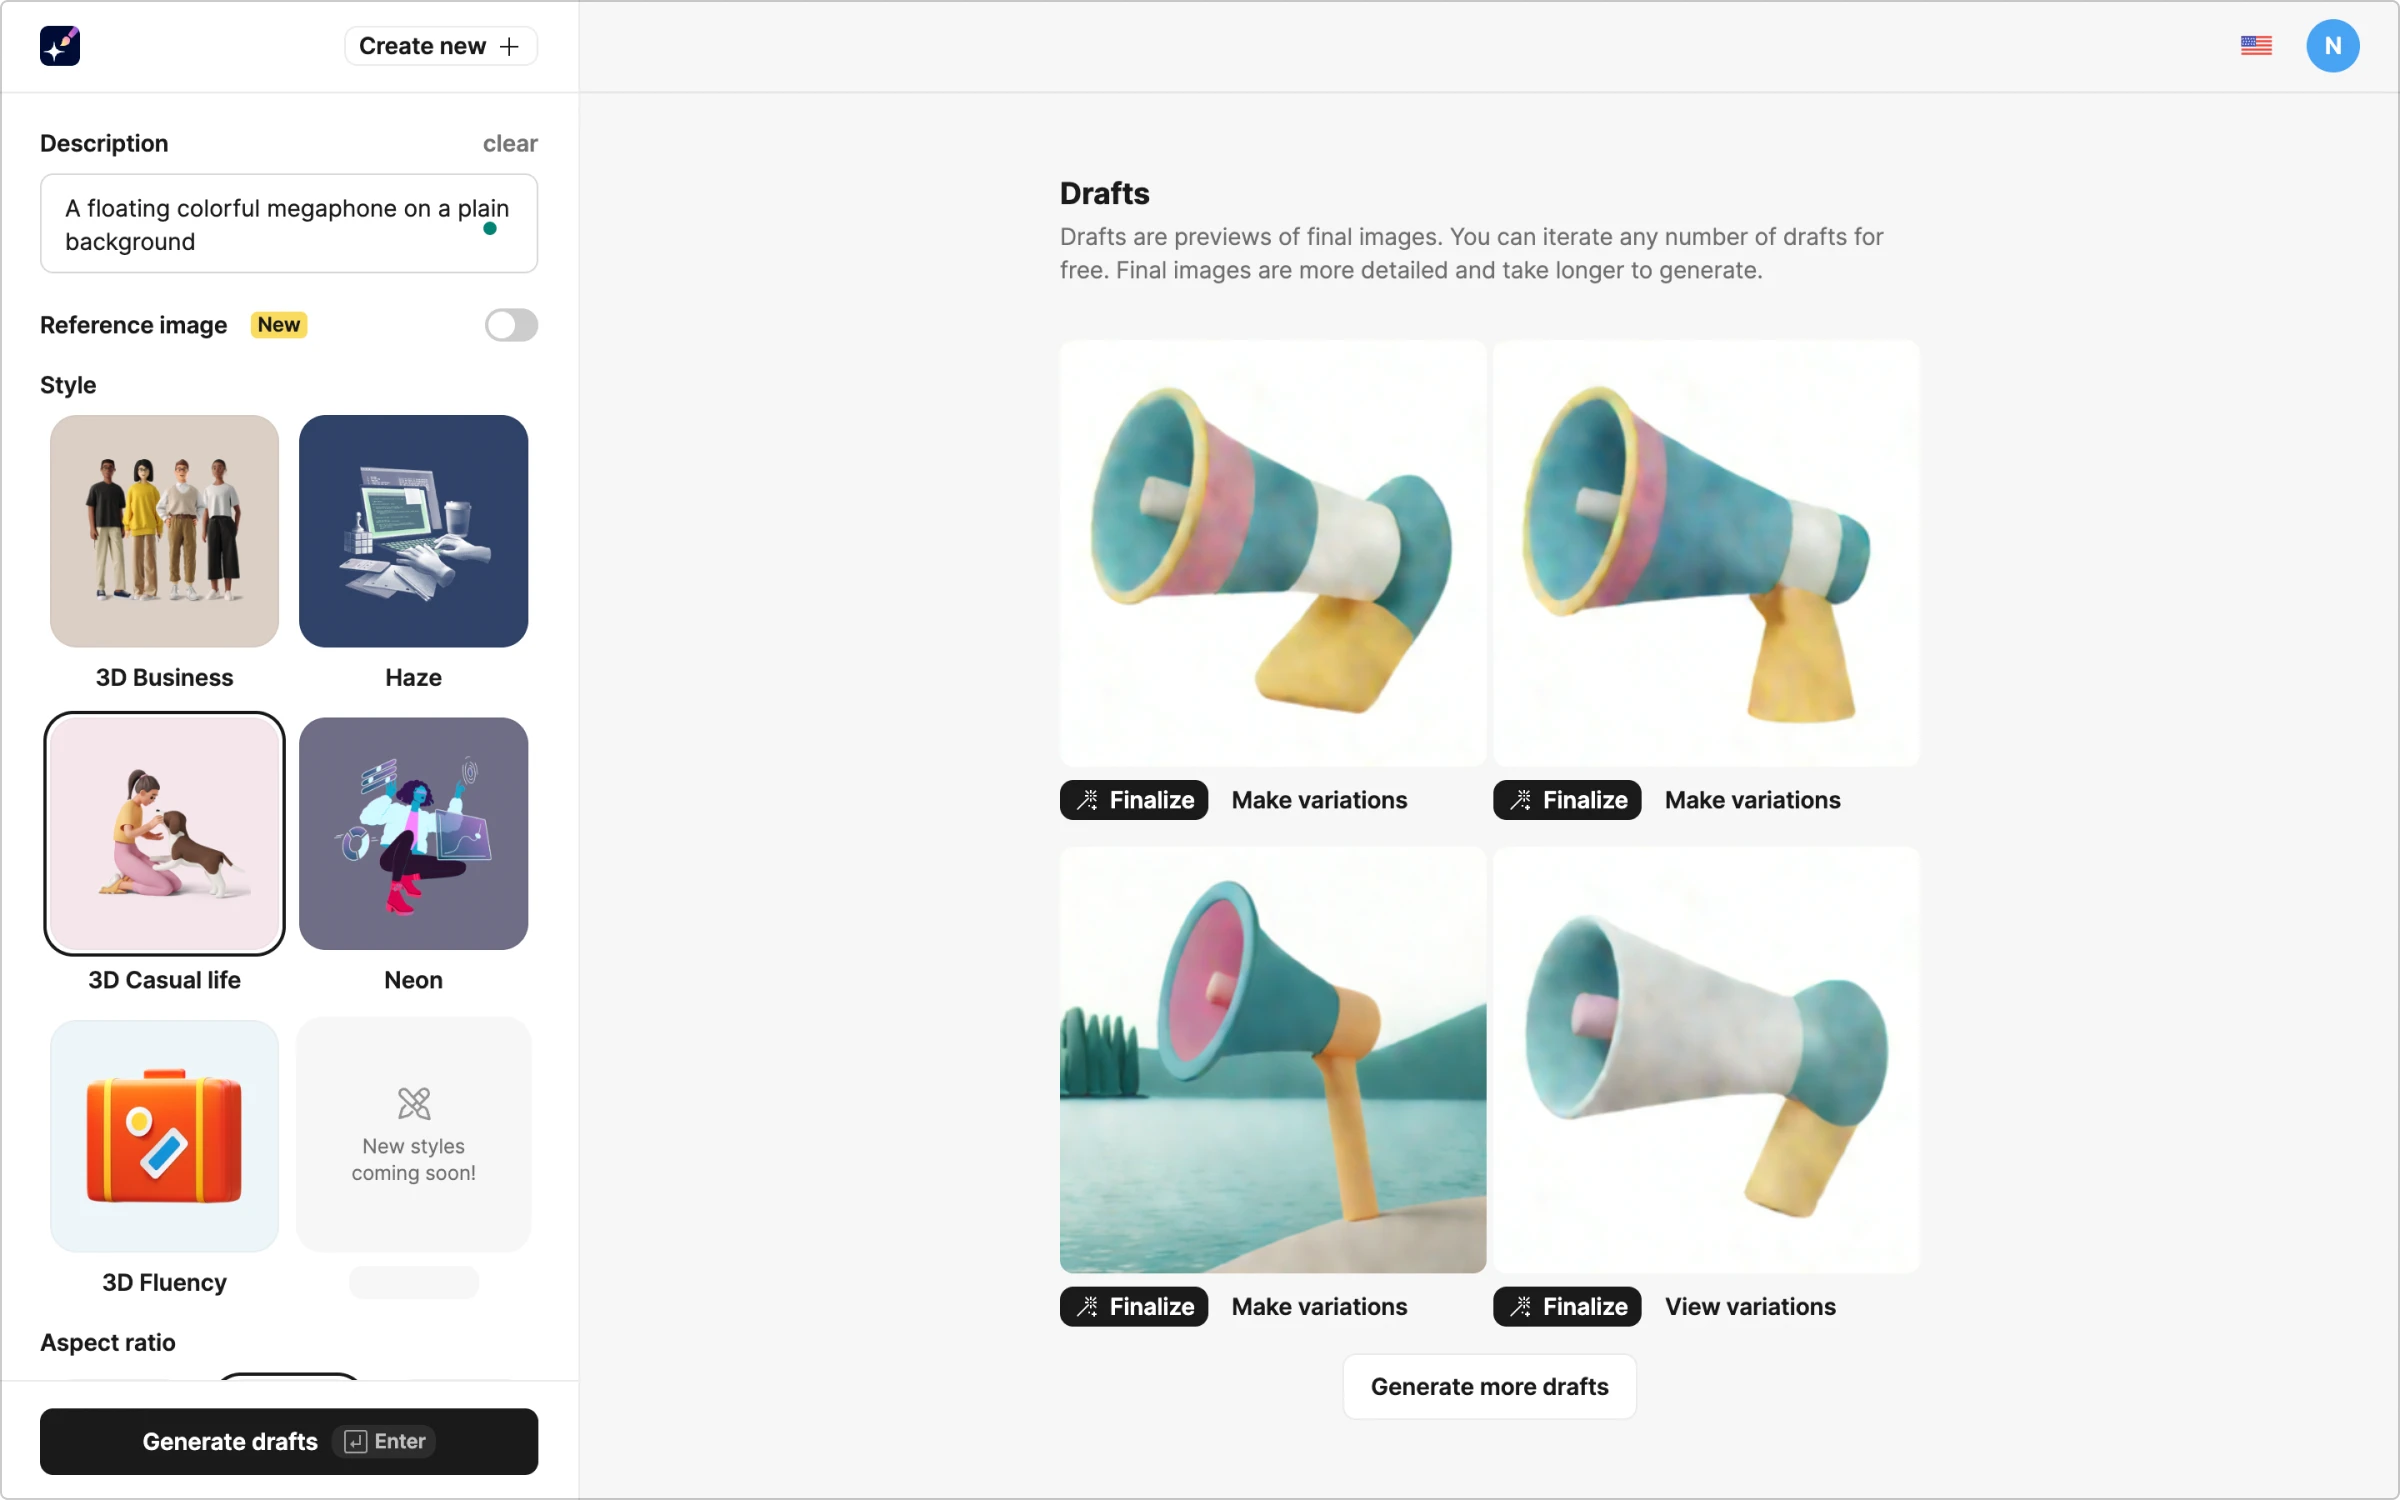 AI-generated drafts of a floating colorful megaphone on a plain background illustration